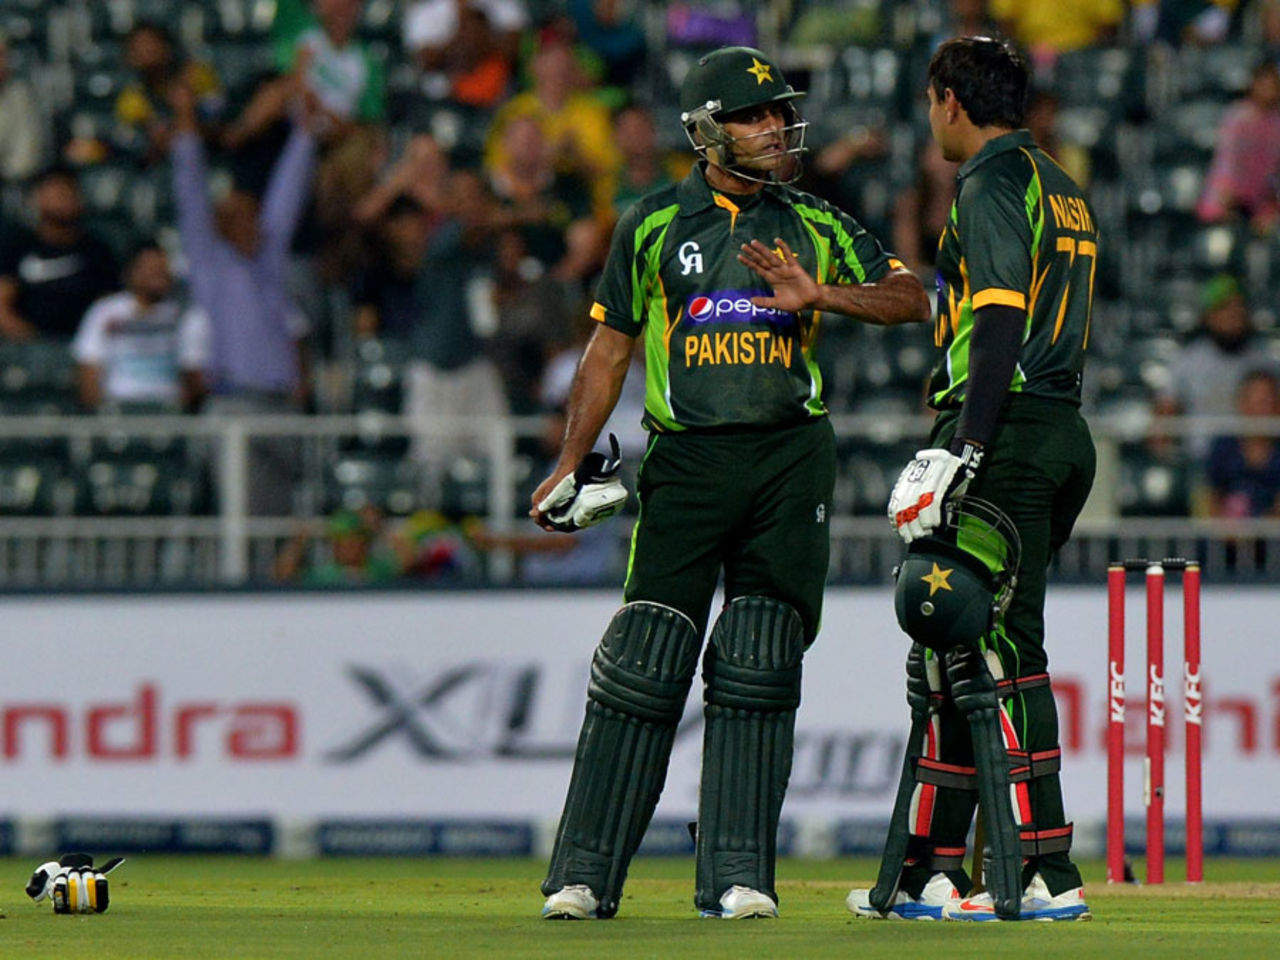 Mohammad Hafeez and Nasir Jamshed have a chat between overs, South Africa v Pakistan, 1st T20I, Johannesburg, November 20, 2013